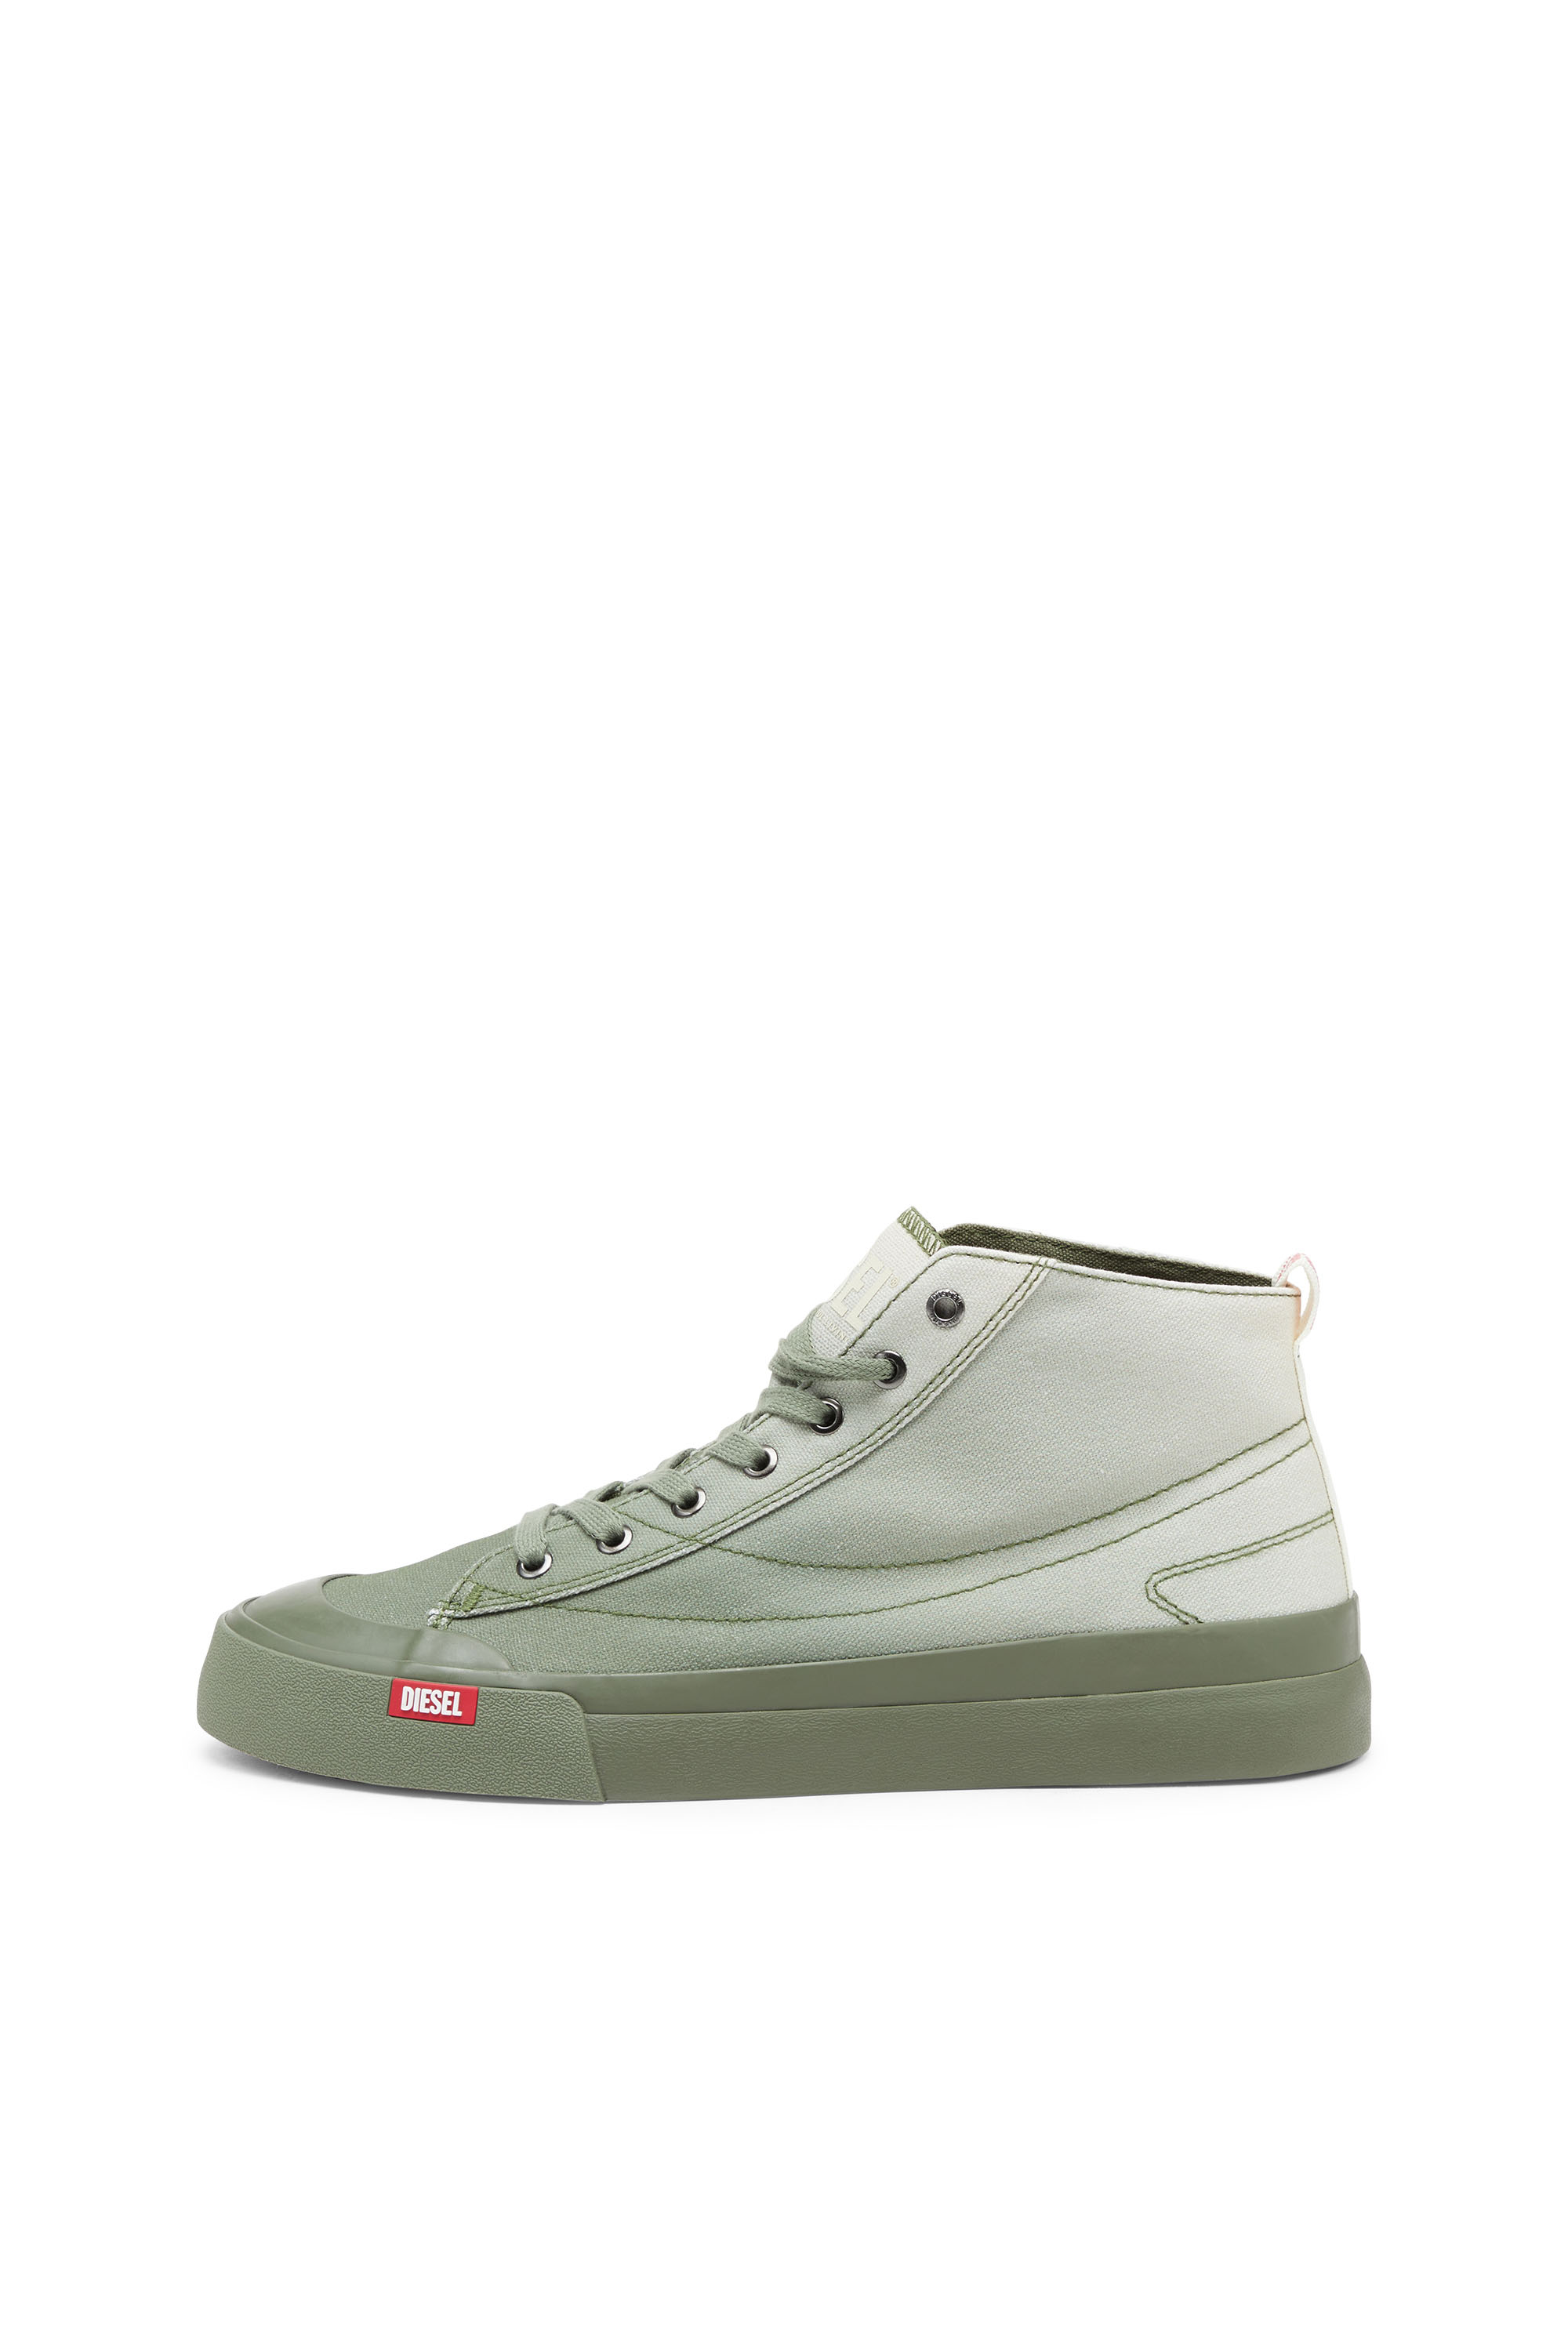 Diesel - S-ATHOS MID, Man S-Athos Mid-High-top sneakers in faded canvas in Multicolor - Image 7